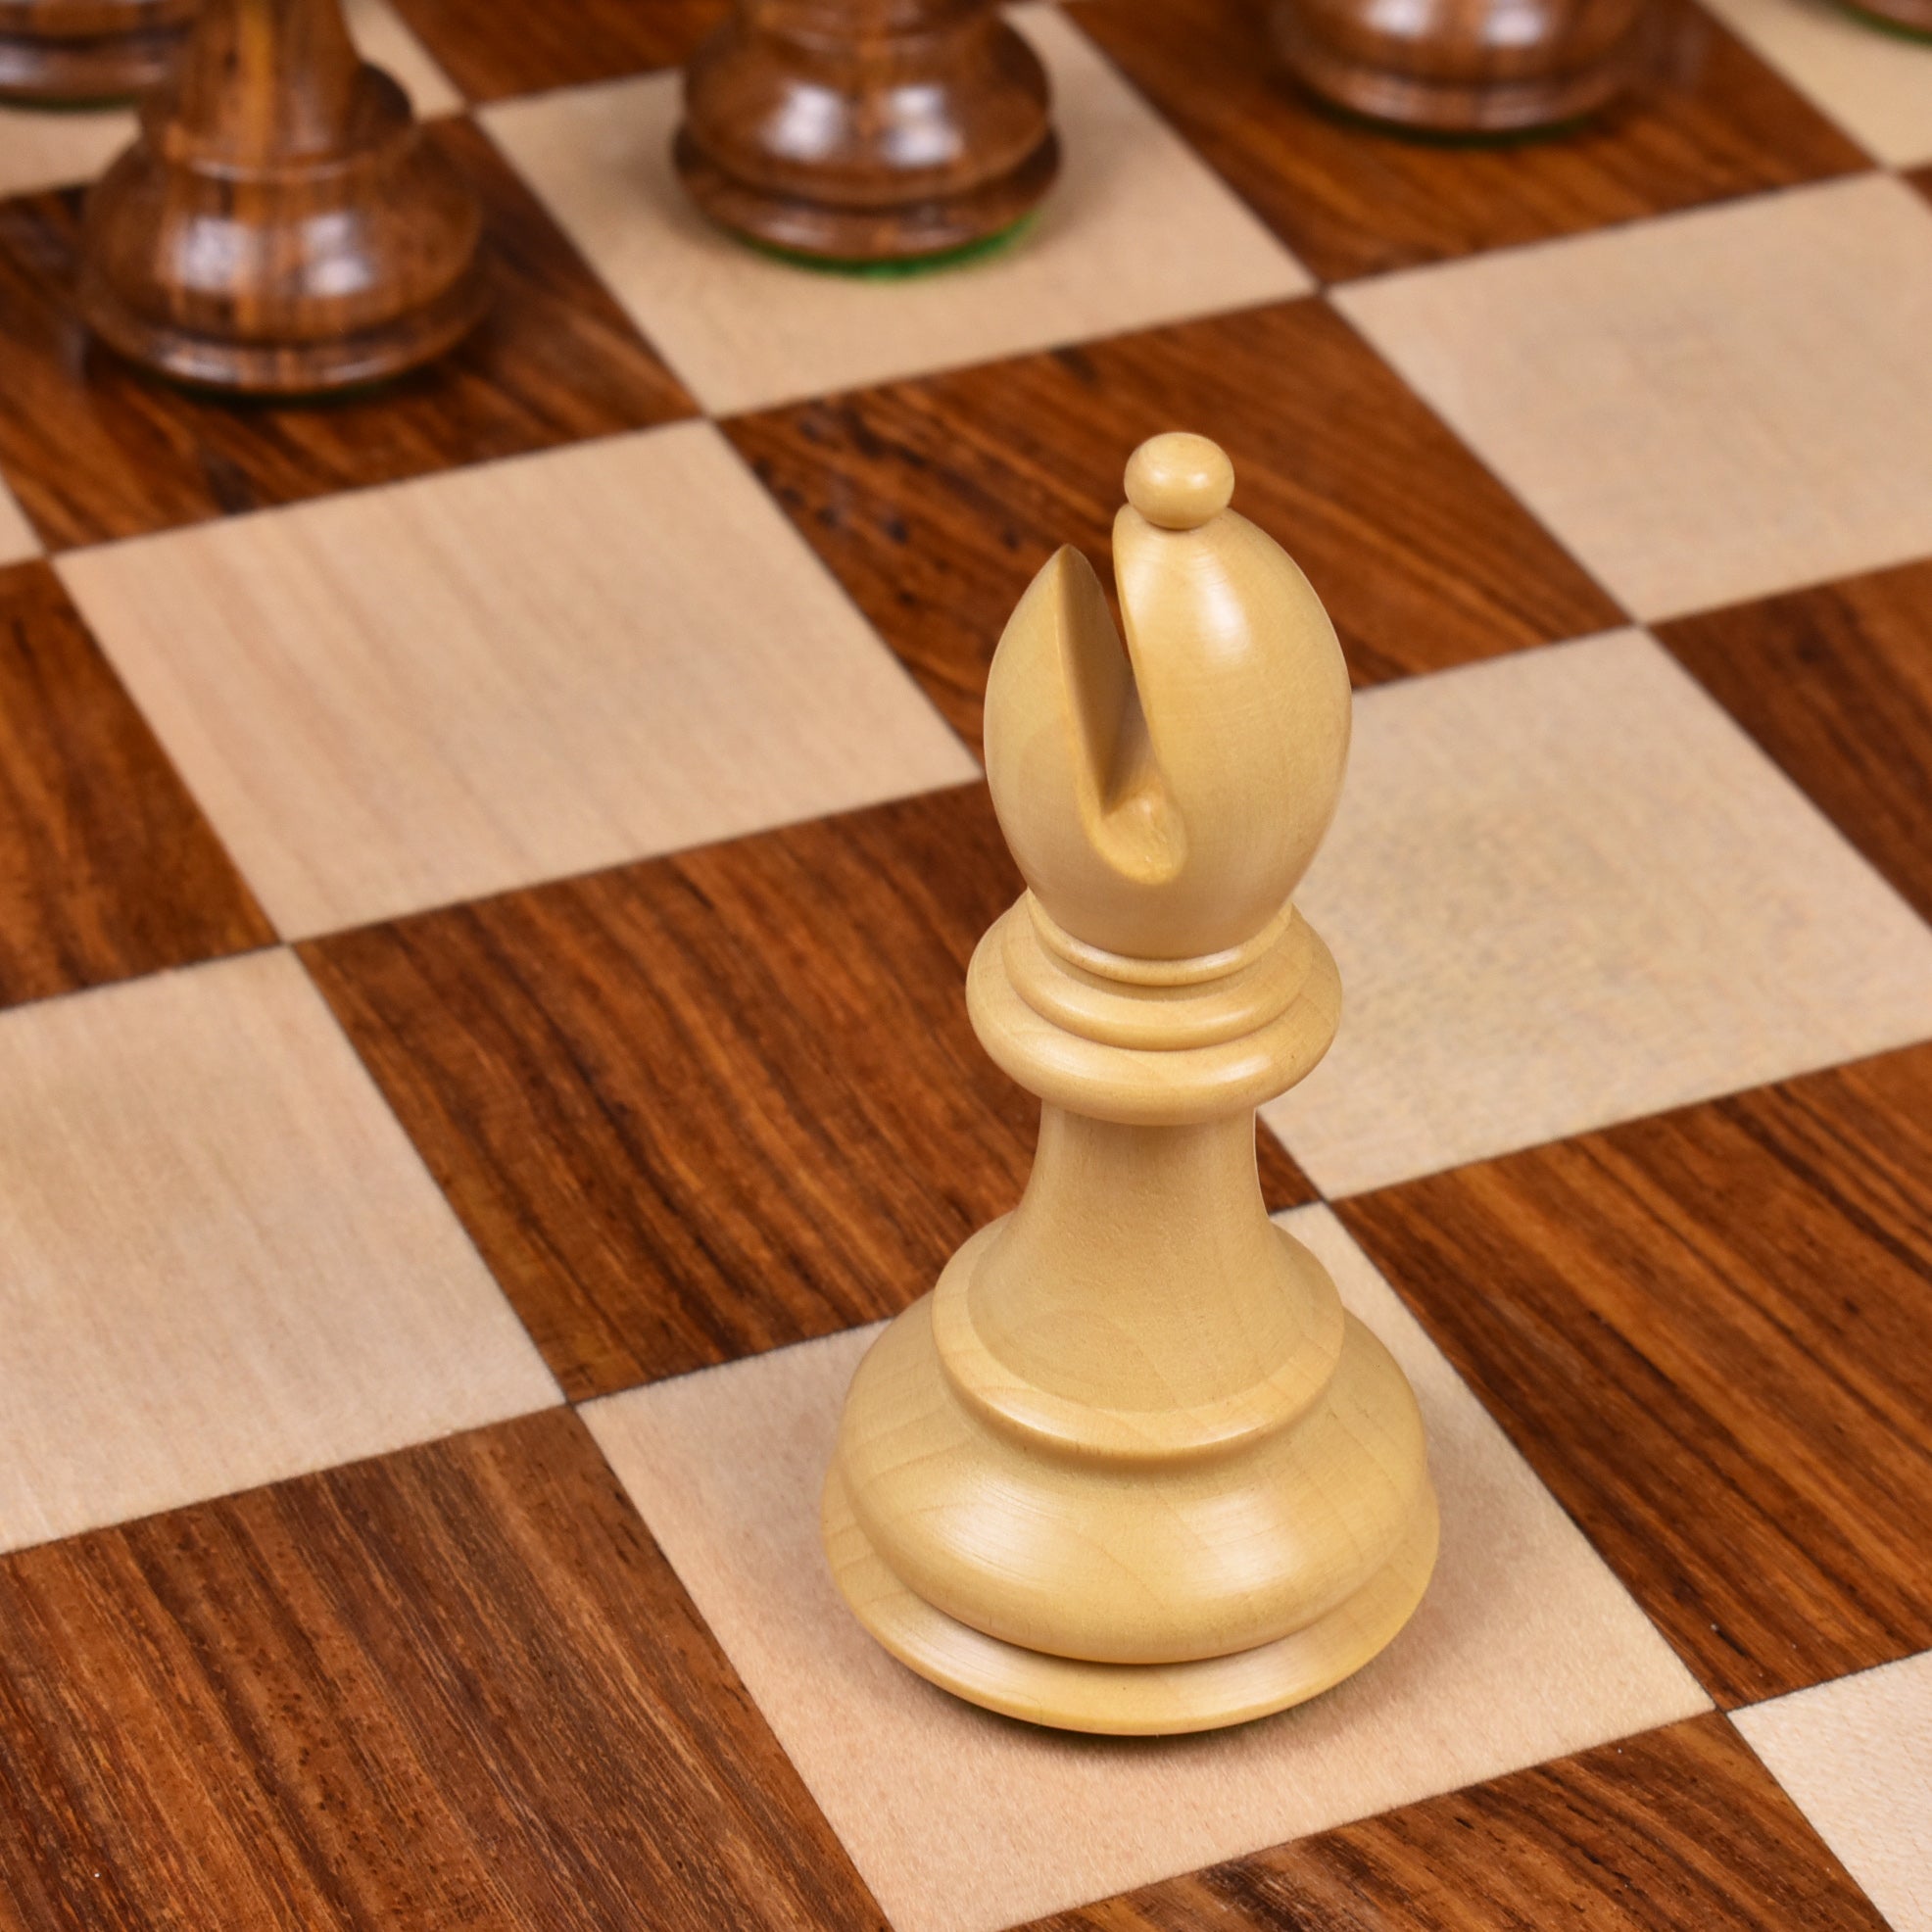 Slightly Imperfect 3.9" Craftsman Knight Staunton Chess Pieces Only set - Triple Weighted Golden Rosewood